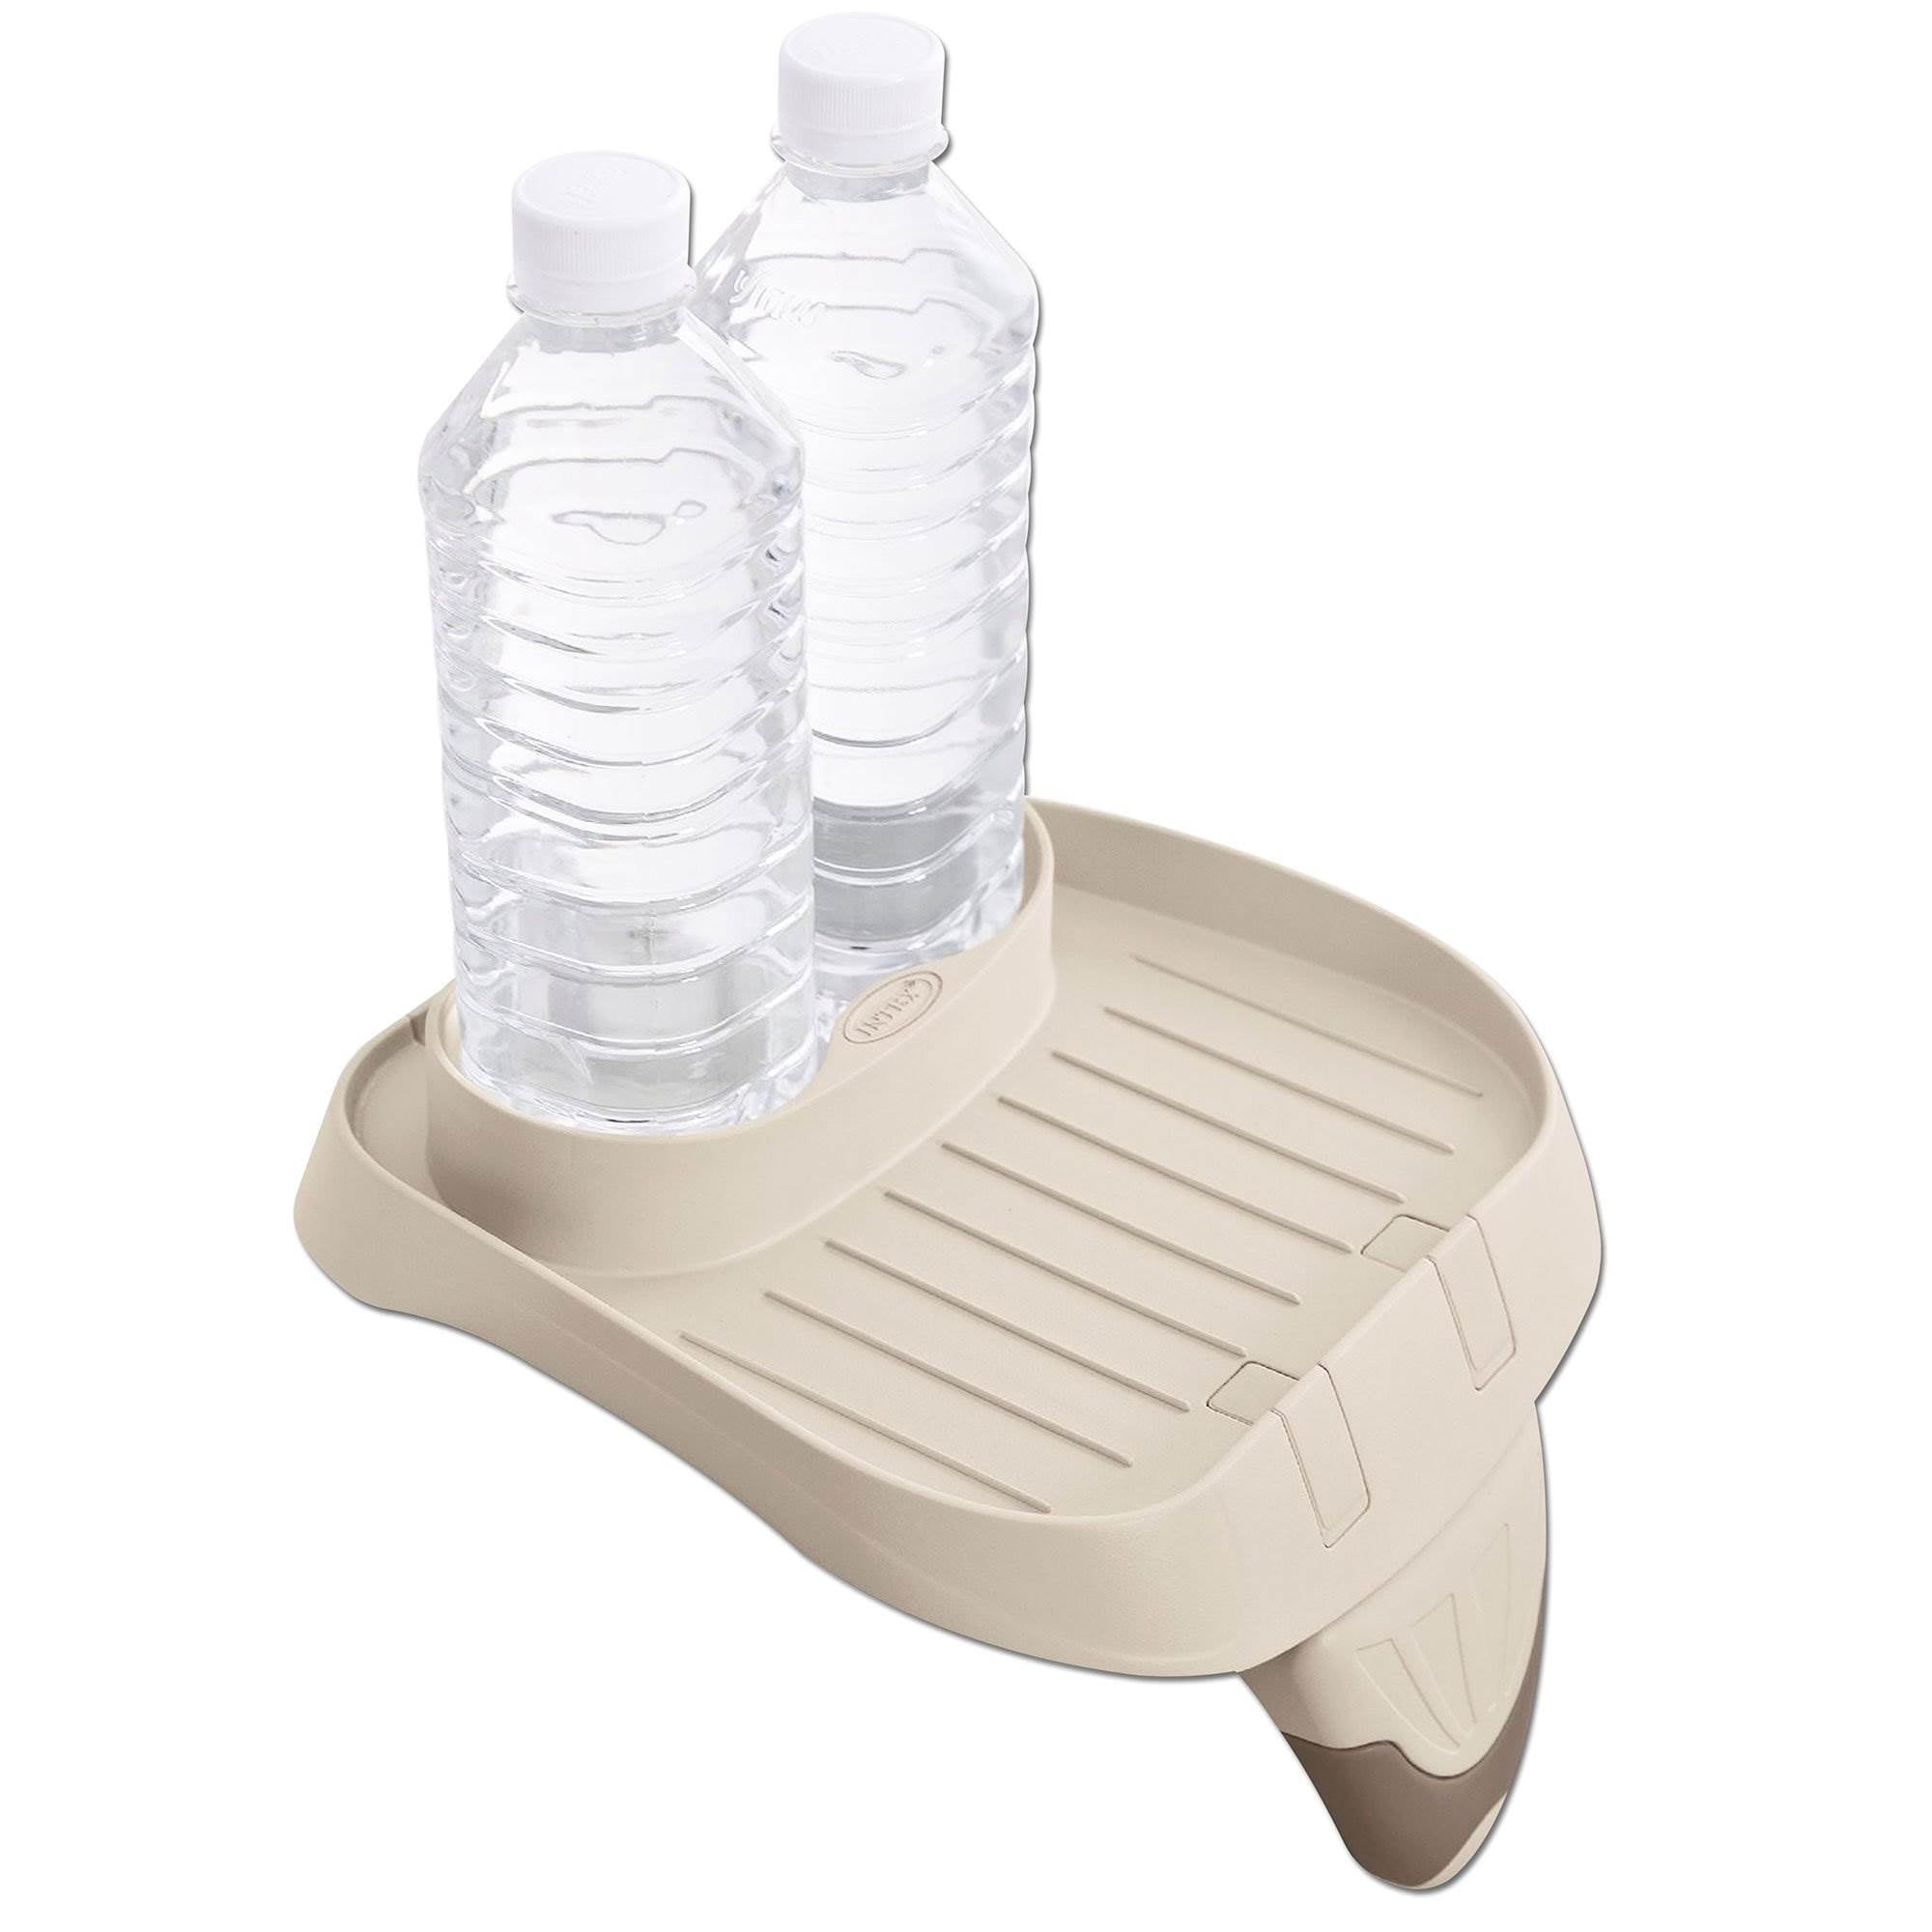 Intex PureSpa Removable Spa Cup Holder and Refreshment Tray